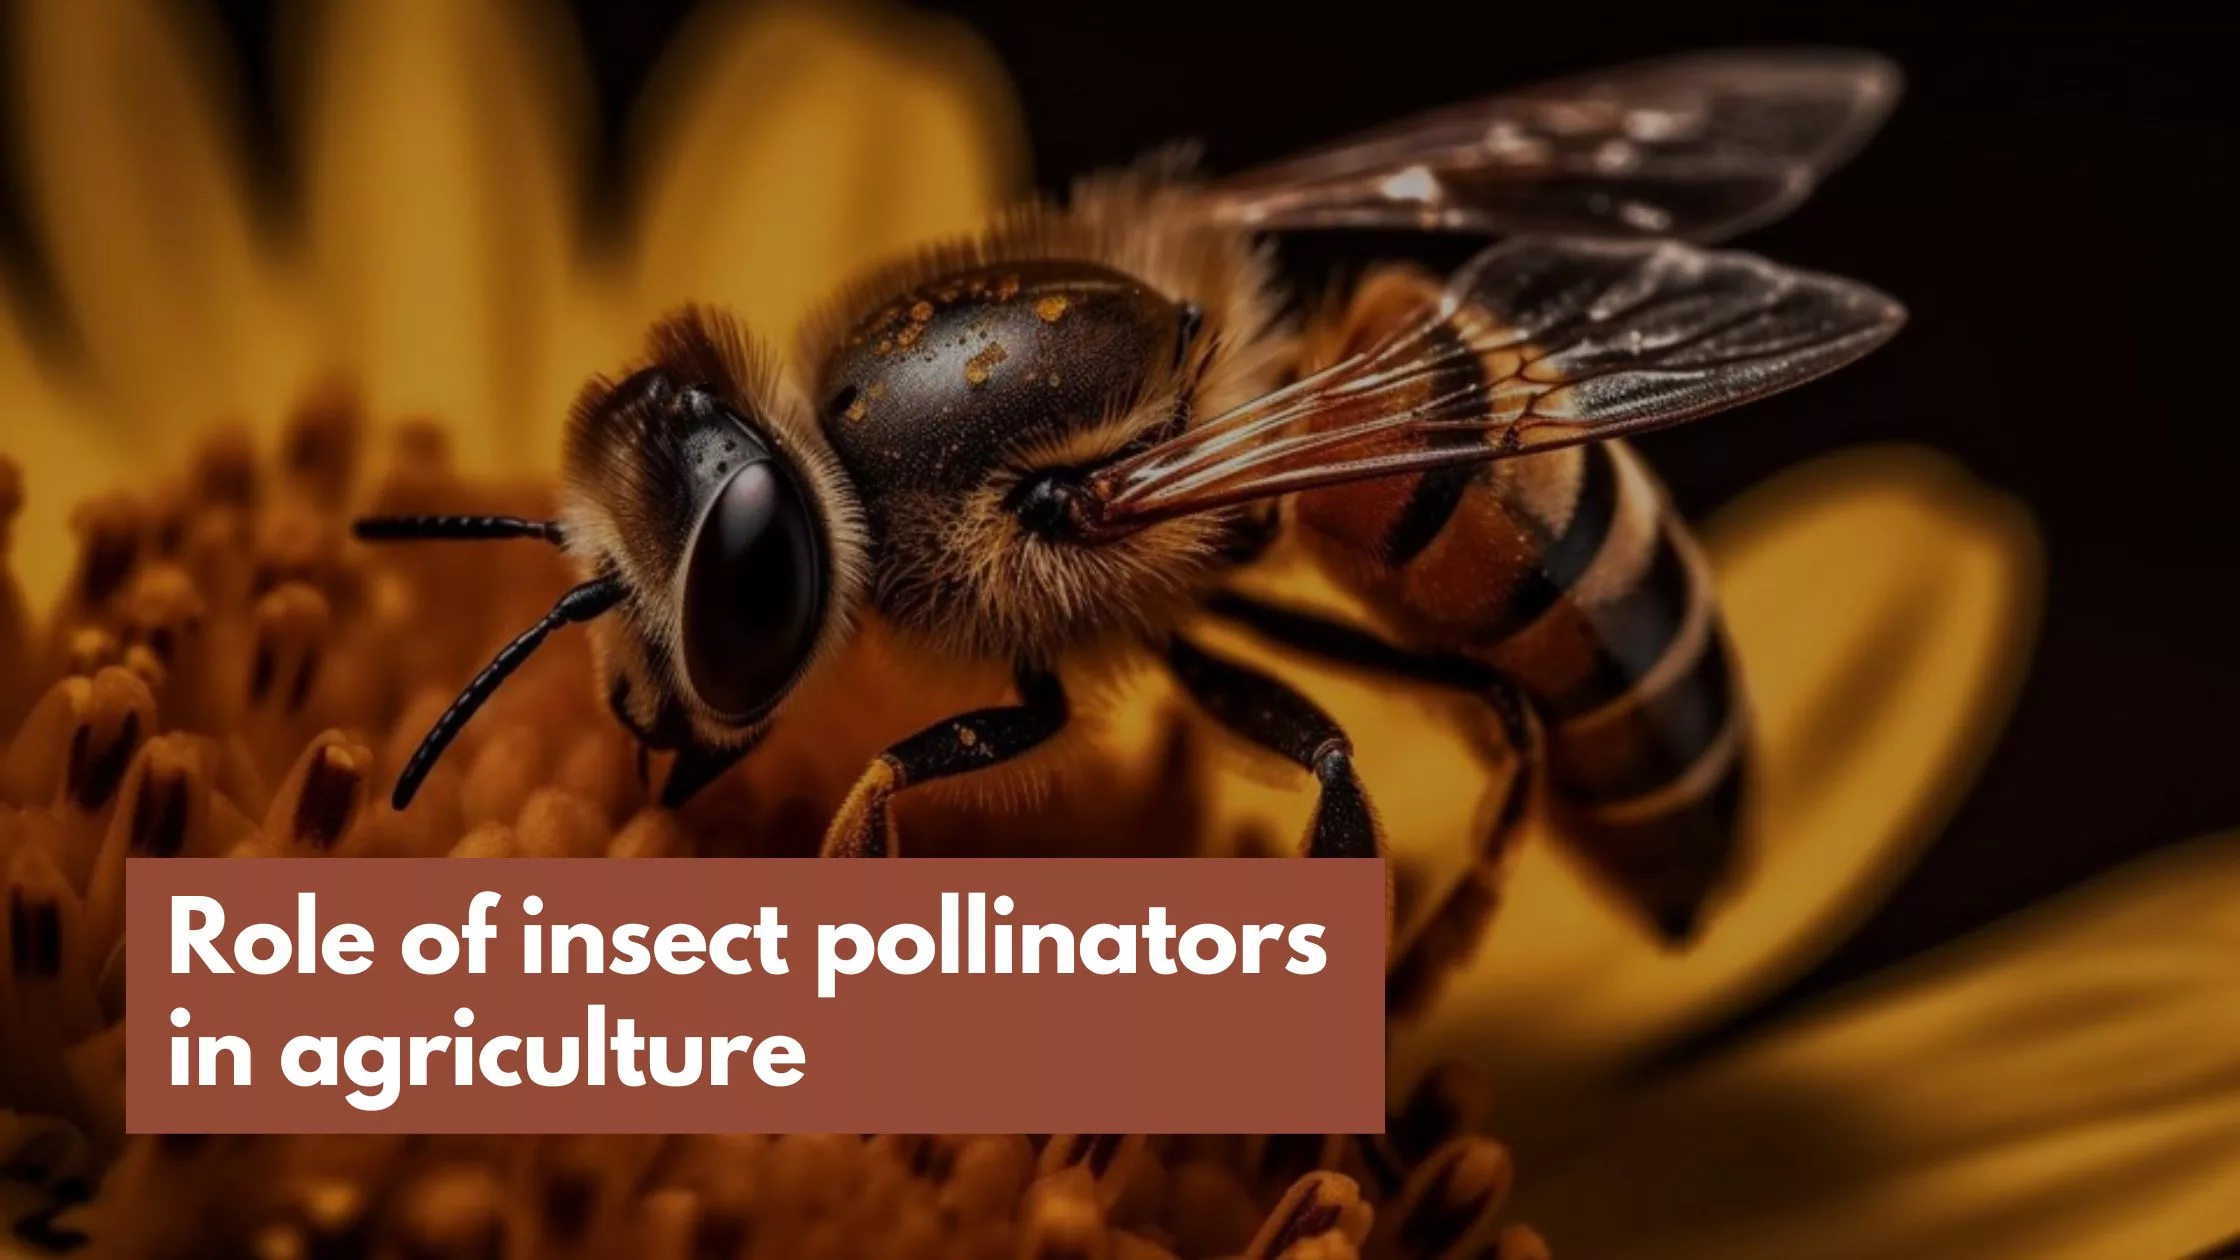 Role of insect pollinators in agriculture